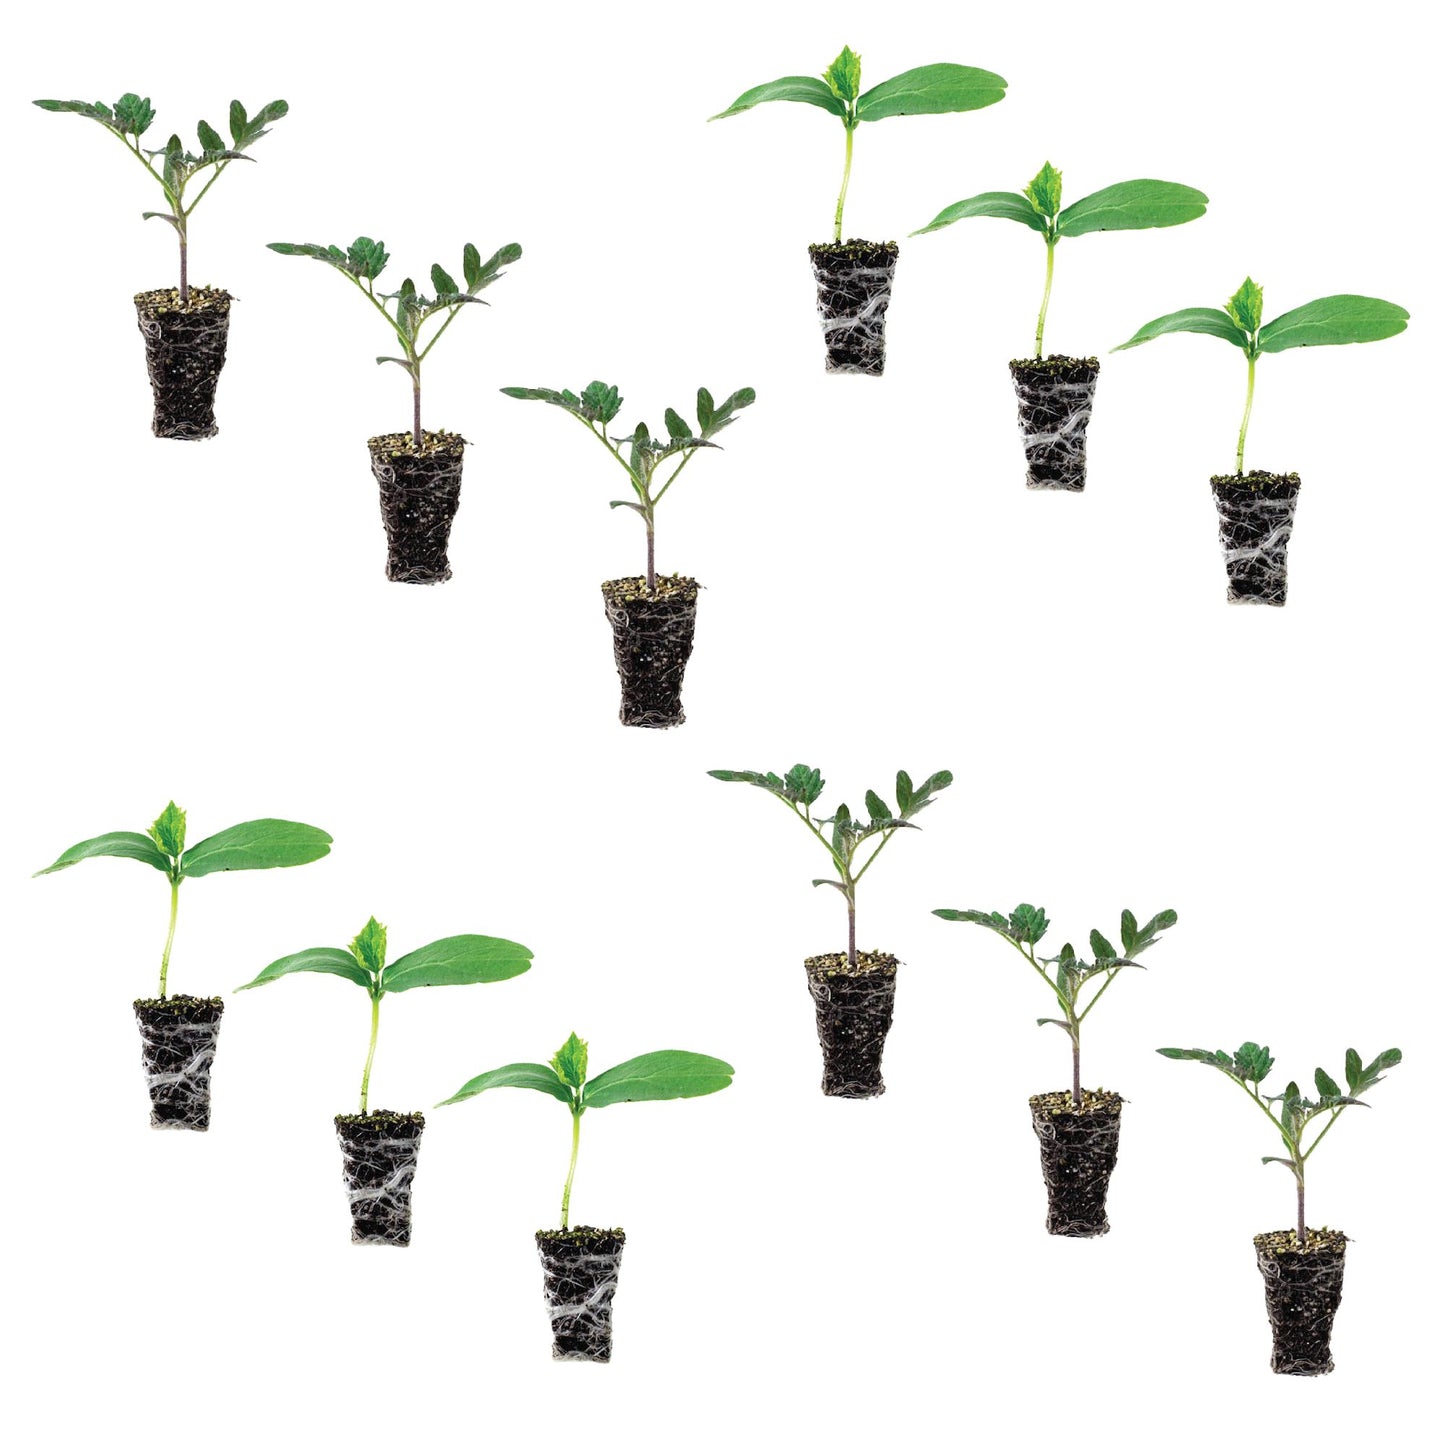 Cucumber & Tomato Plantlings Kit Live Baby Plants 1-3in., 12-Pack